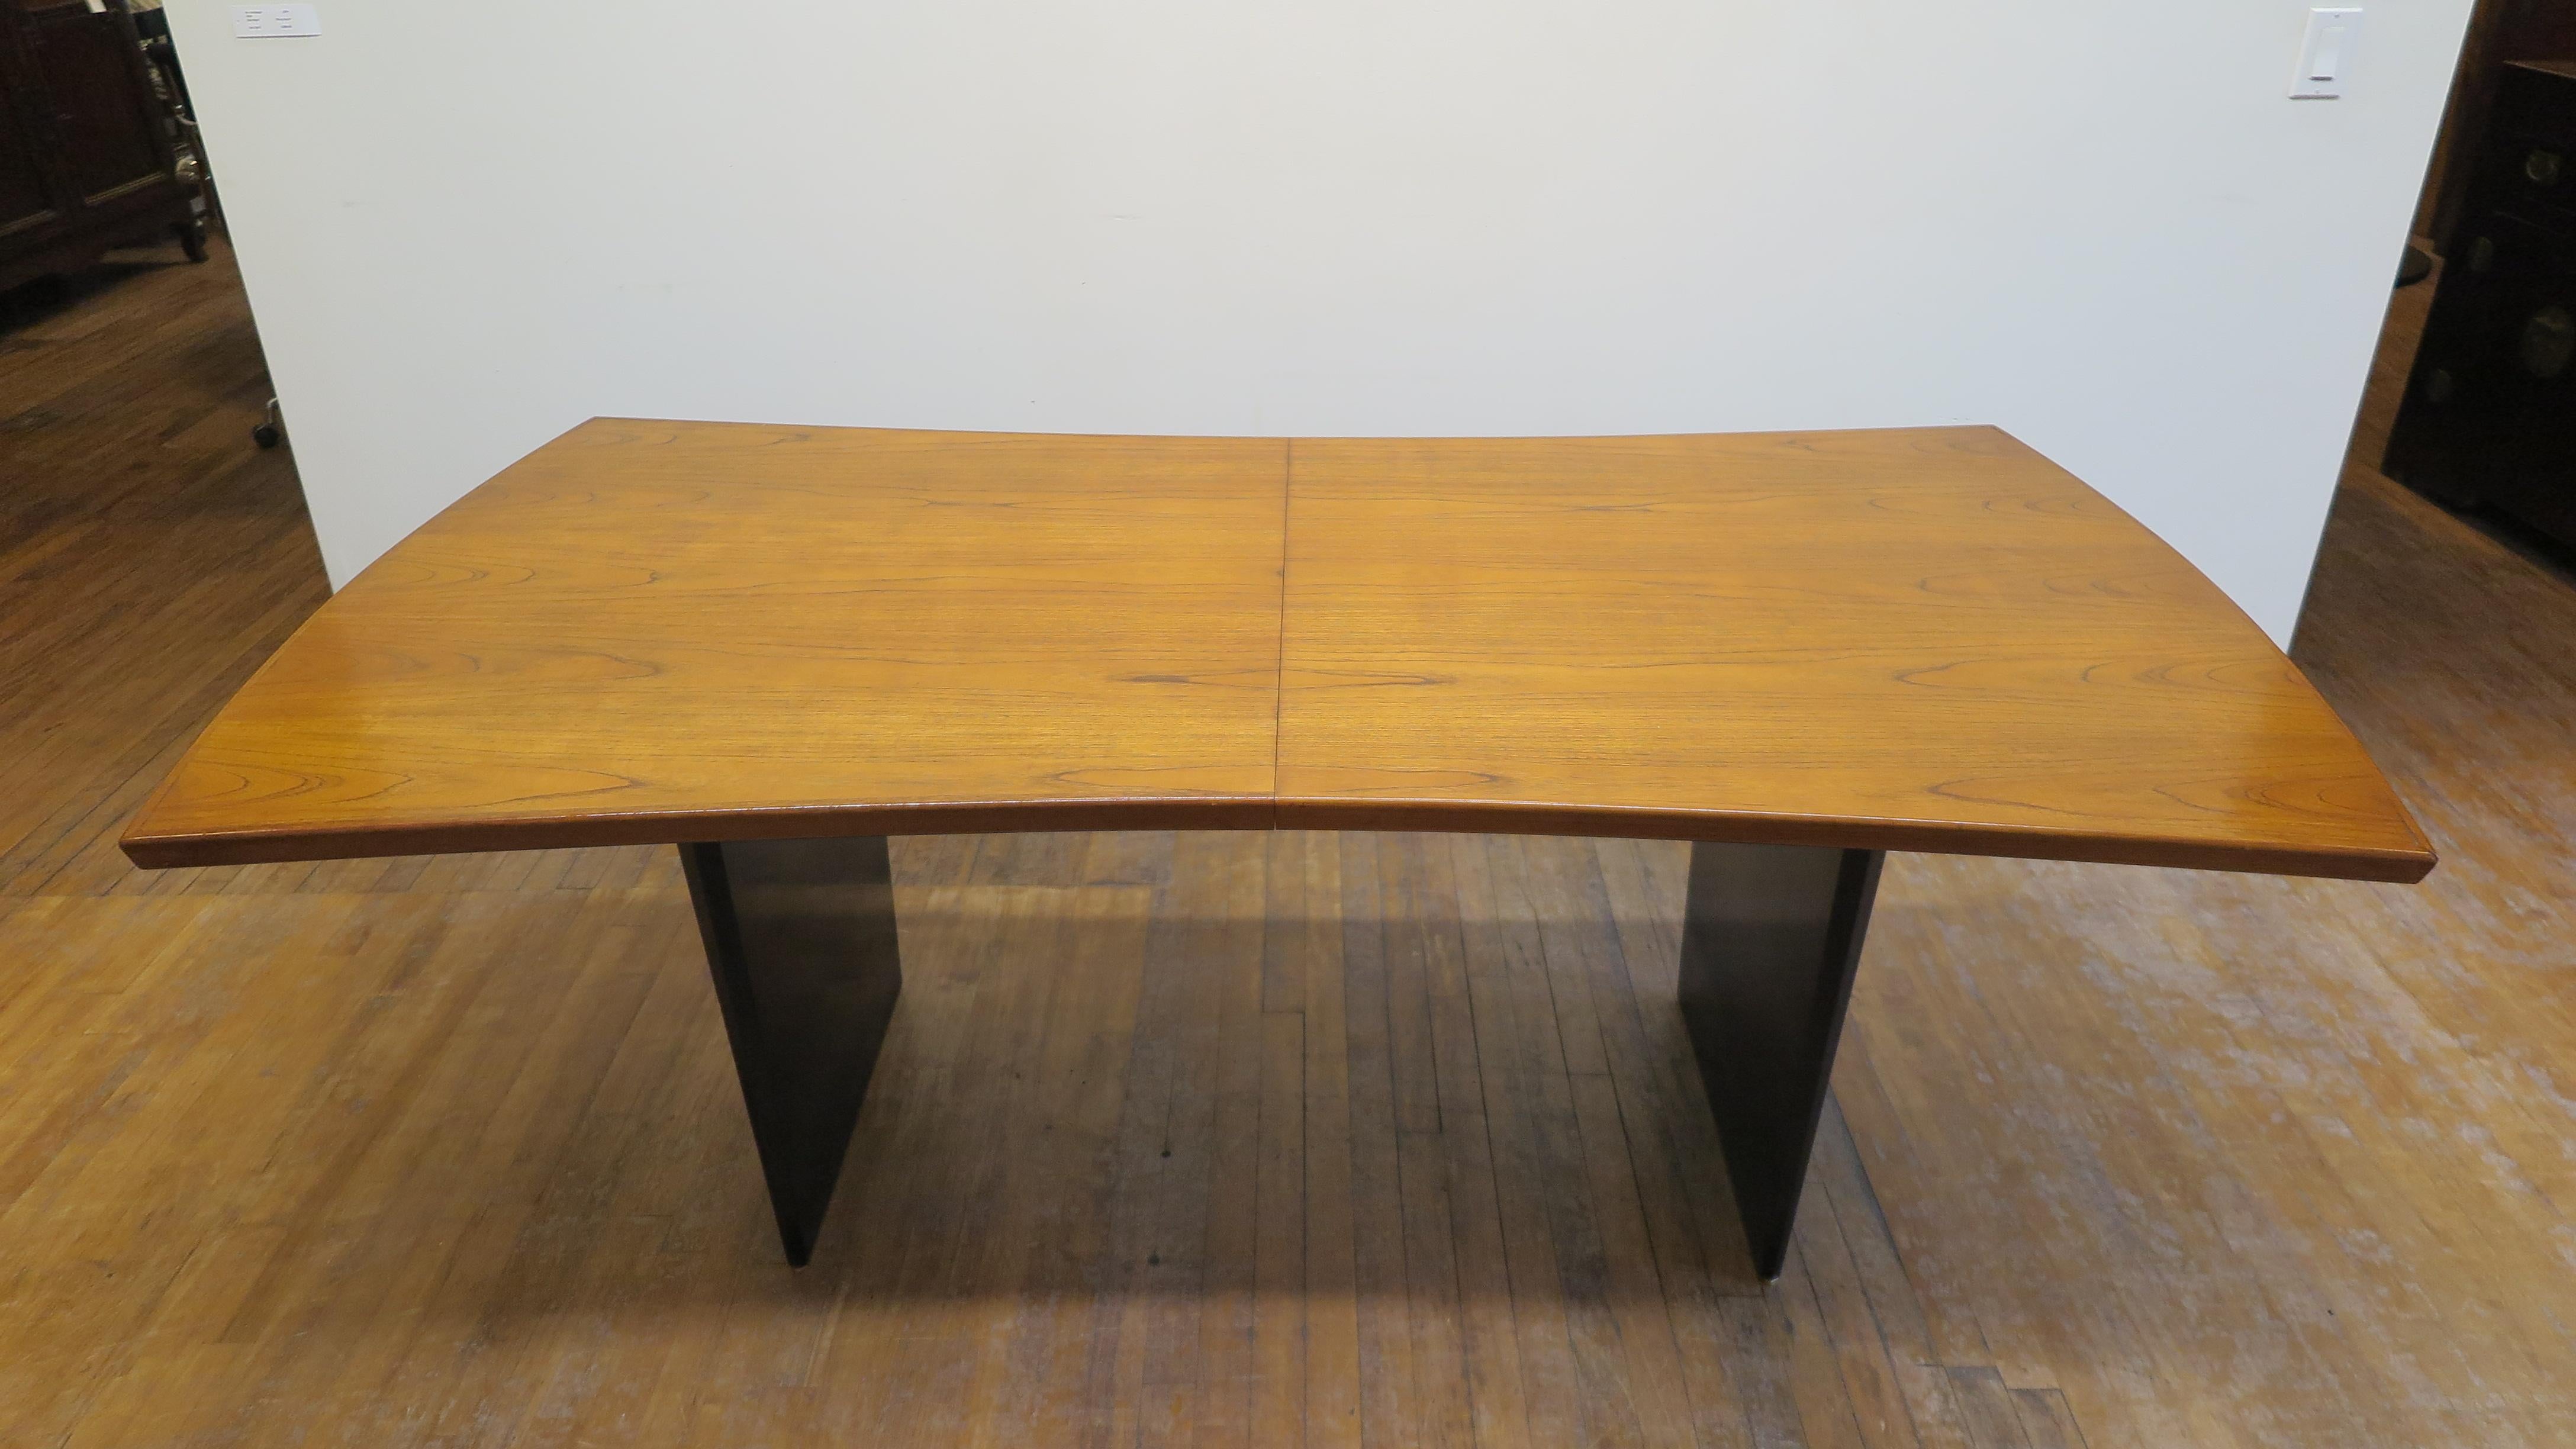 Harvey Probber bow tie dining table. Mid-Century Modern dining table by Harvey Probber in the shape of a Bow Tie. Teak top with walnut legs having a solid brass glide bar on the bottom of each leg. Table is 78 inches long closed two additional